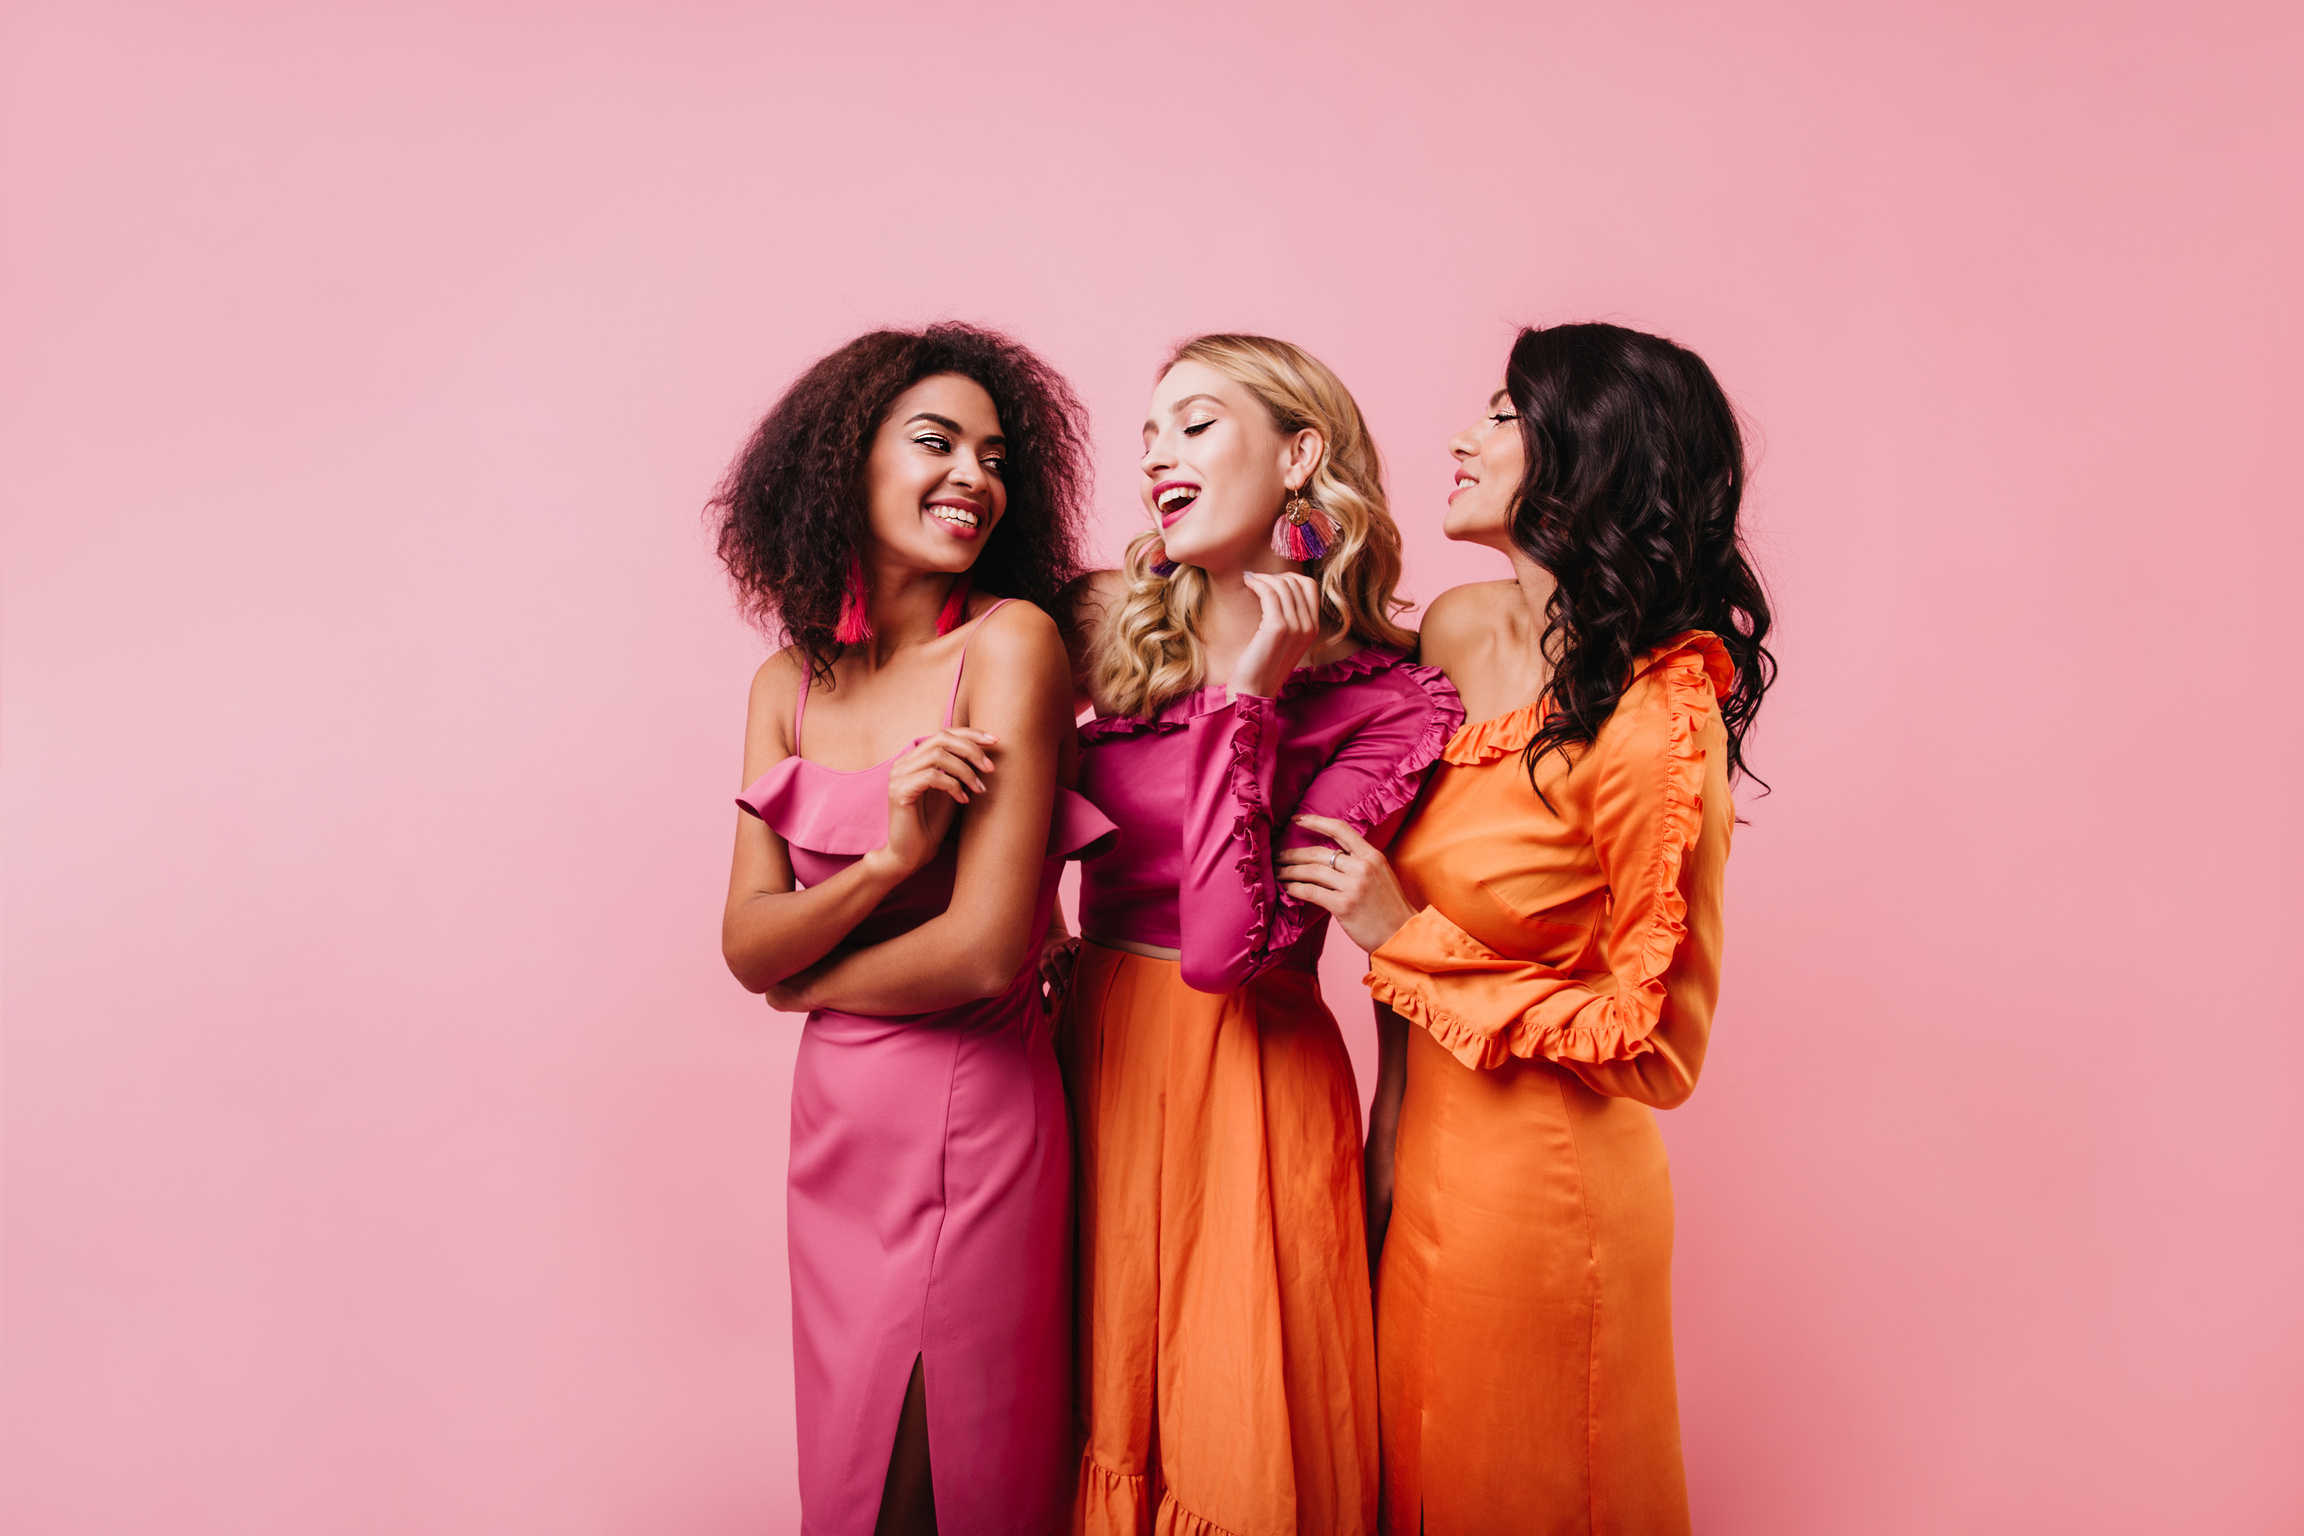 Three Girls Dancing on Pink Background. Studio Shot of Female Friends Chilling Together